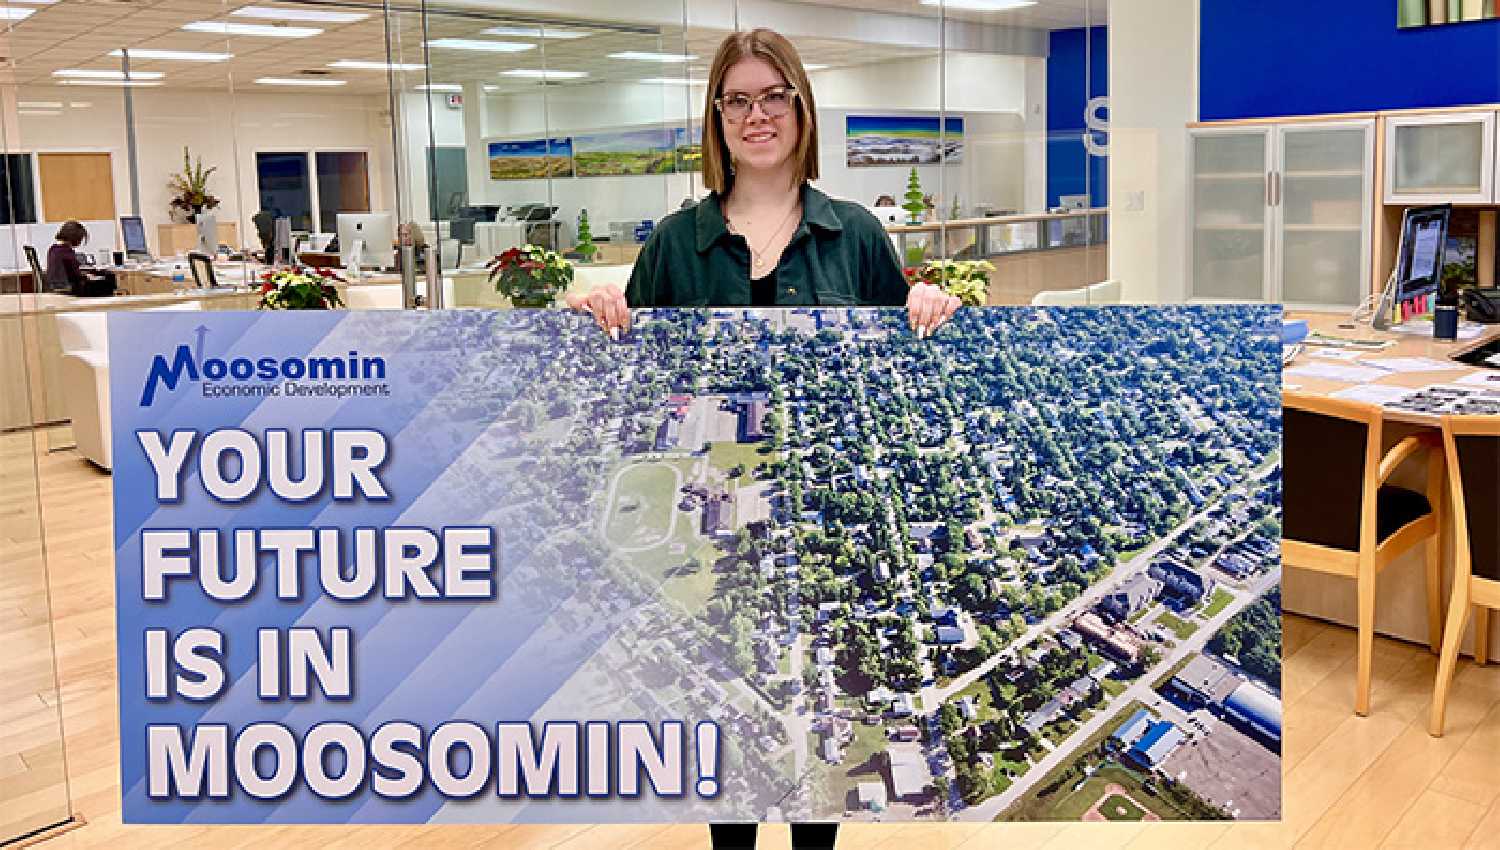 Moosomin Economic Development Officer Casey McCormac, pictured, and Borderland Co-op employee Ievgeniia Tsymbal will represent Moosomin at the career fair for newcomers in Saskatoon Wednesday.